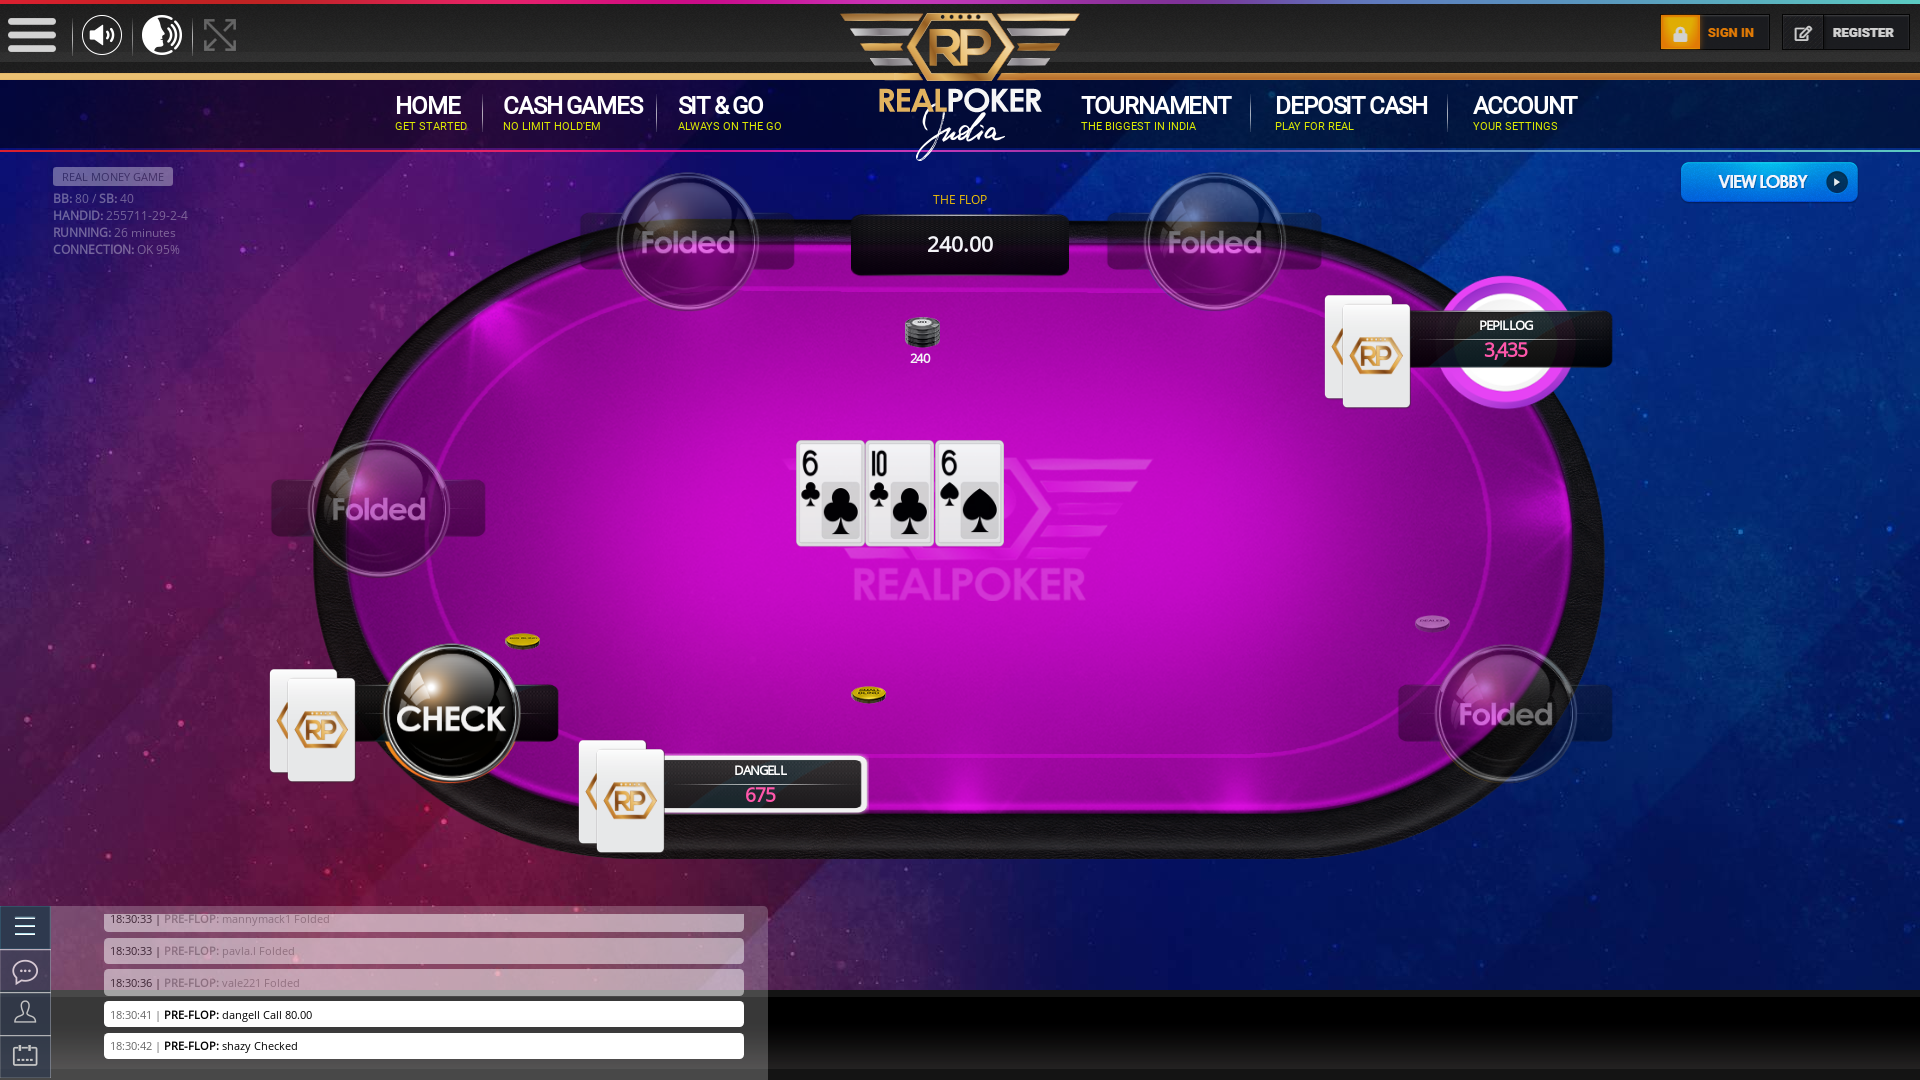 10 player texas holdem table at real poker with the table id 255711